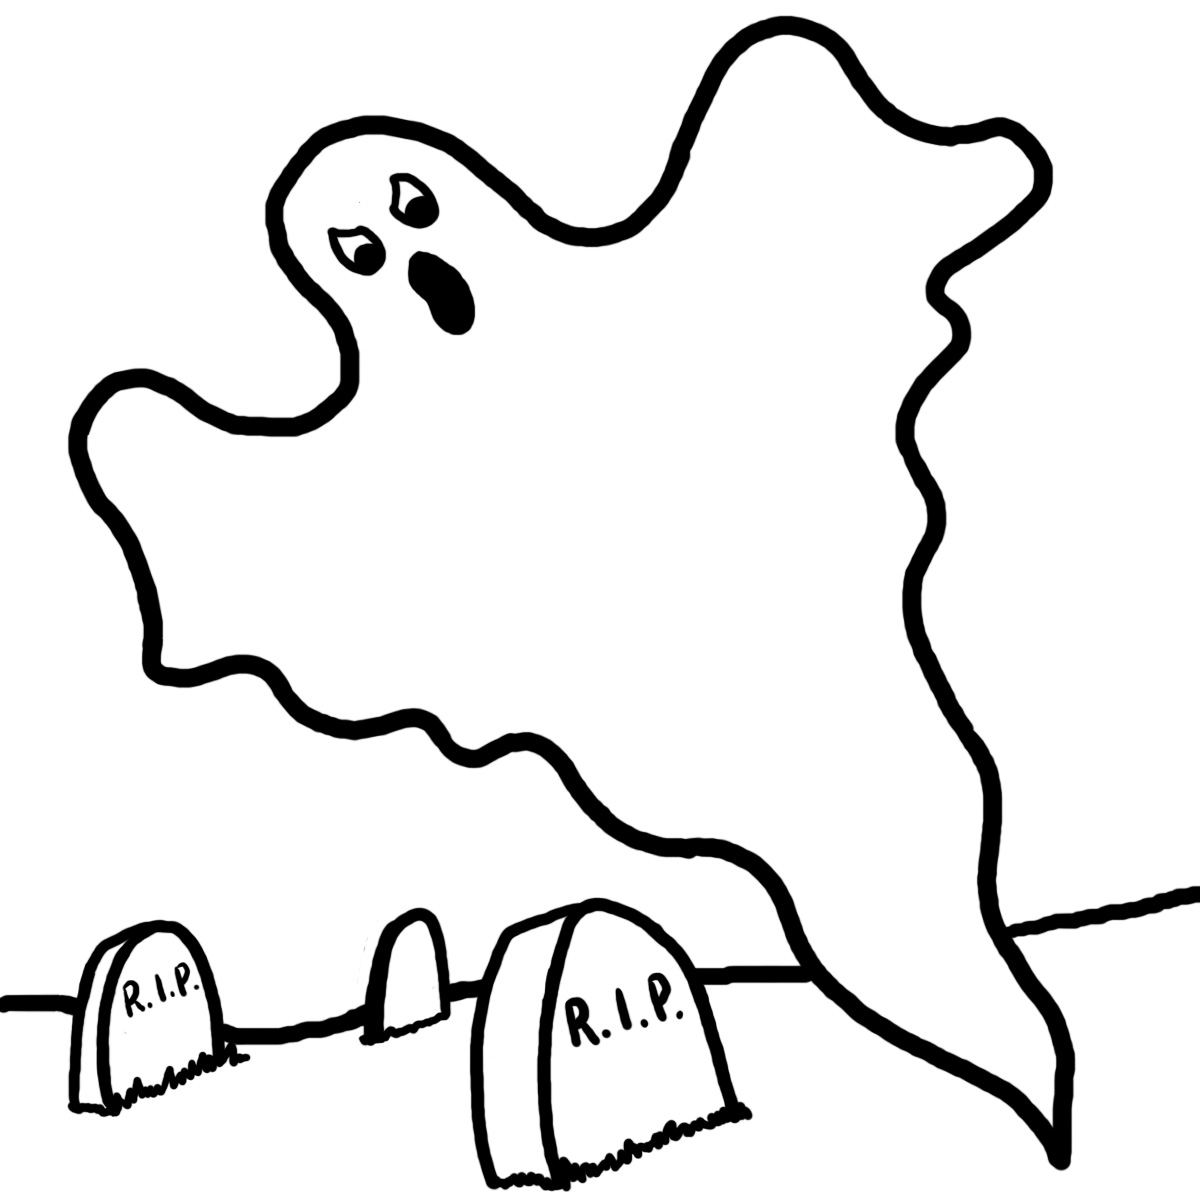 Happy Halloween Ghost | Clipart Panda - Free Clipart Images